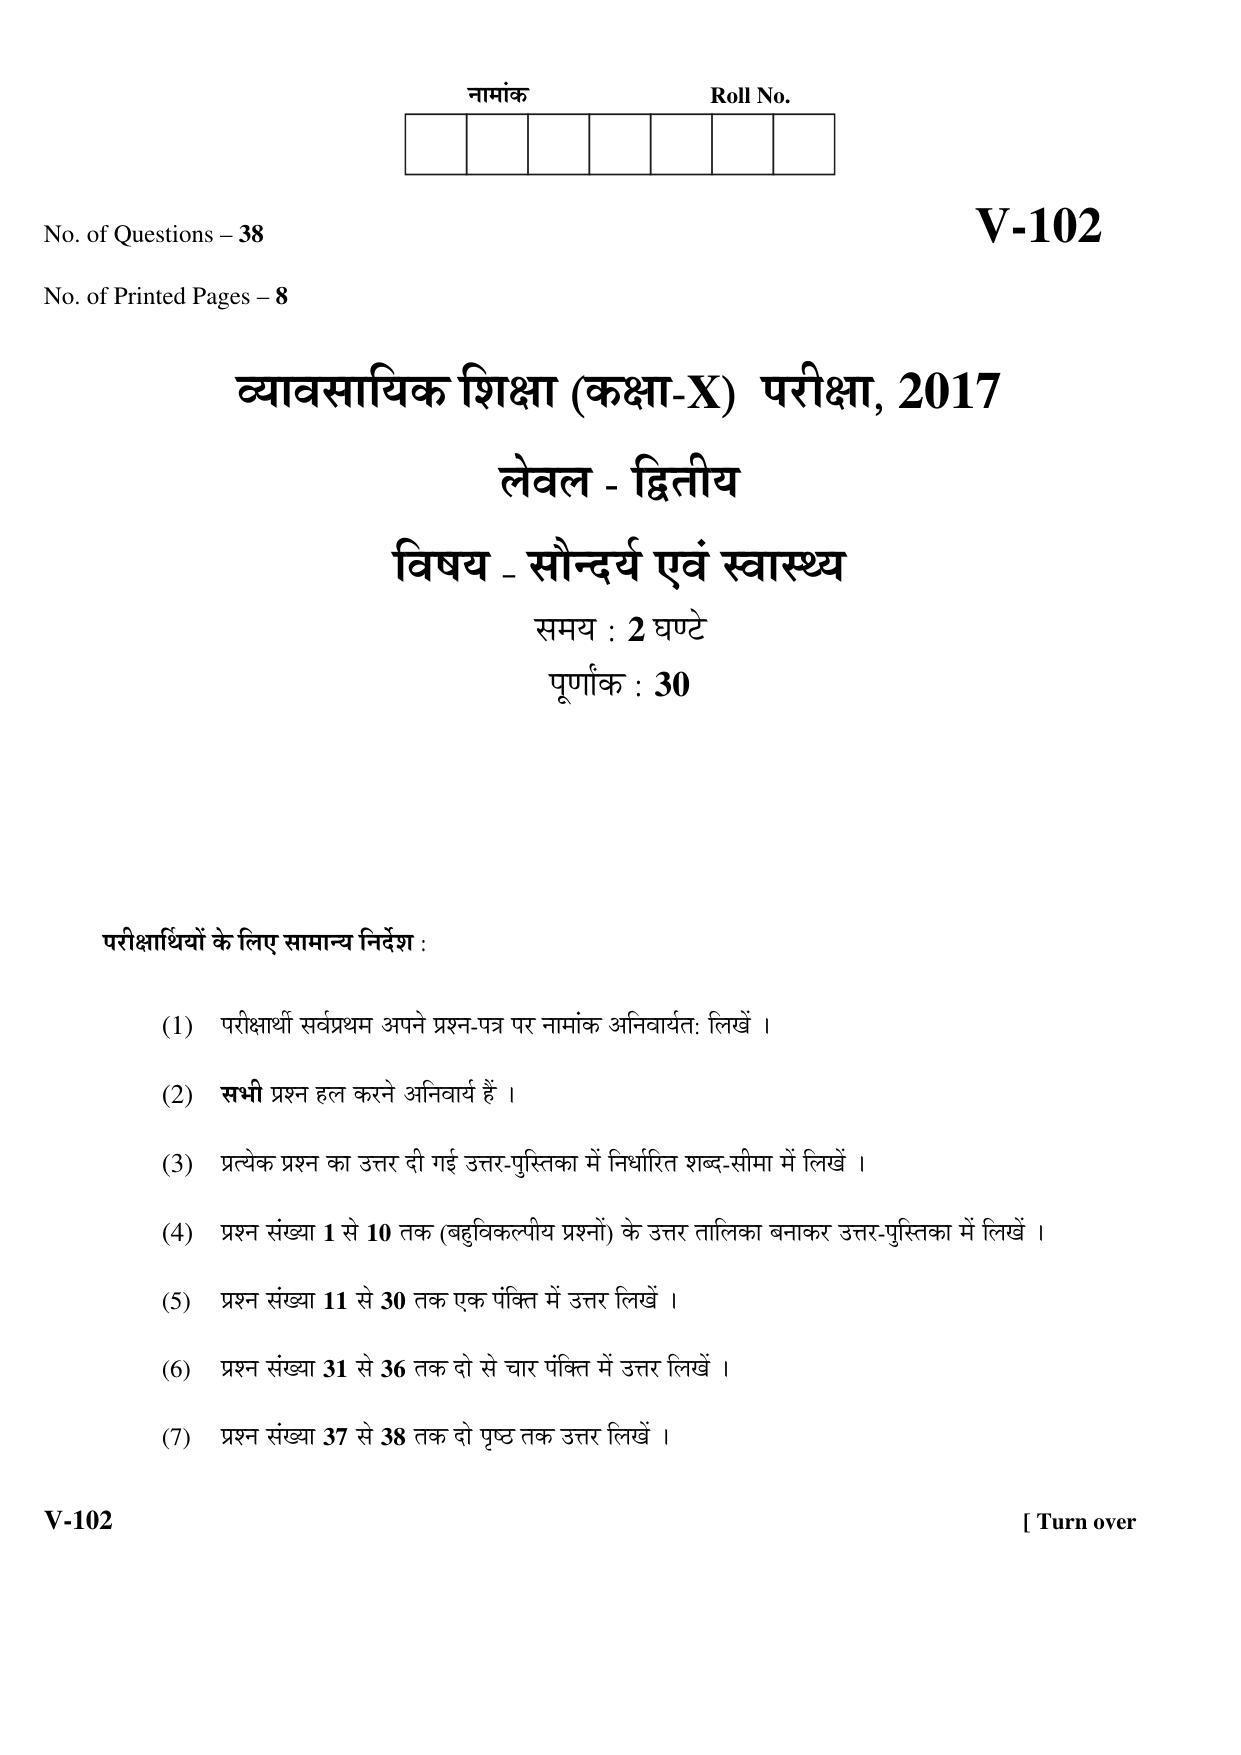 RBSE 2017 Class 10 Beauty-Health (Vocational) Question Paper - Page 1